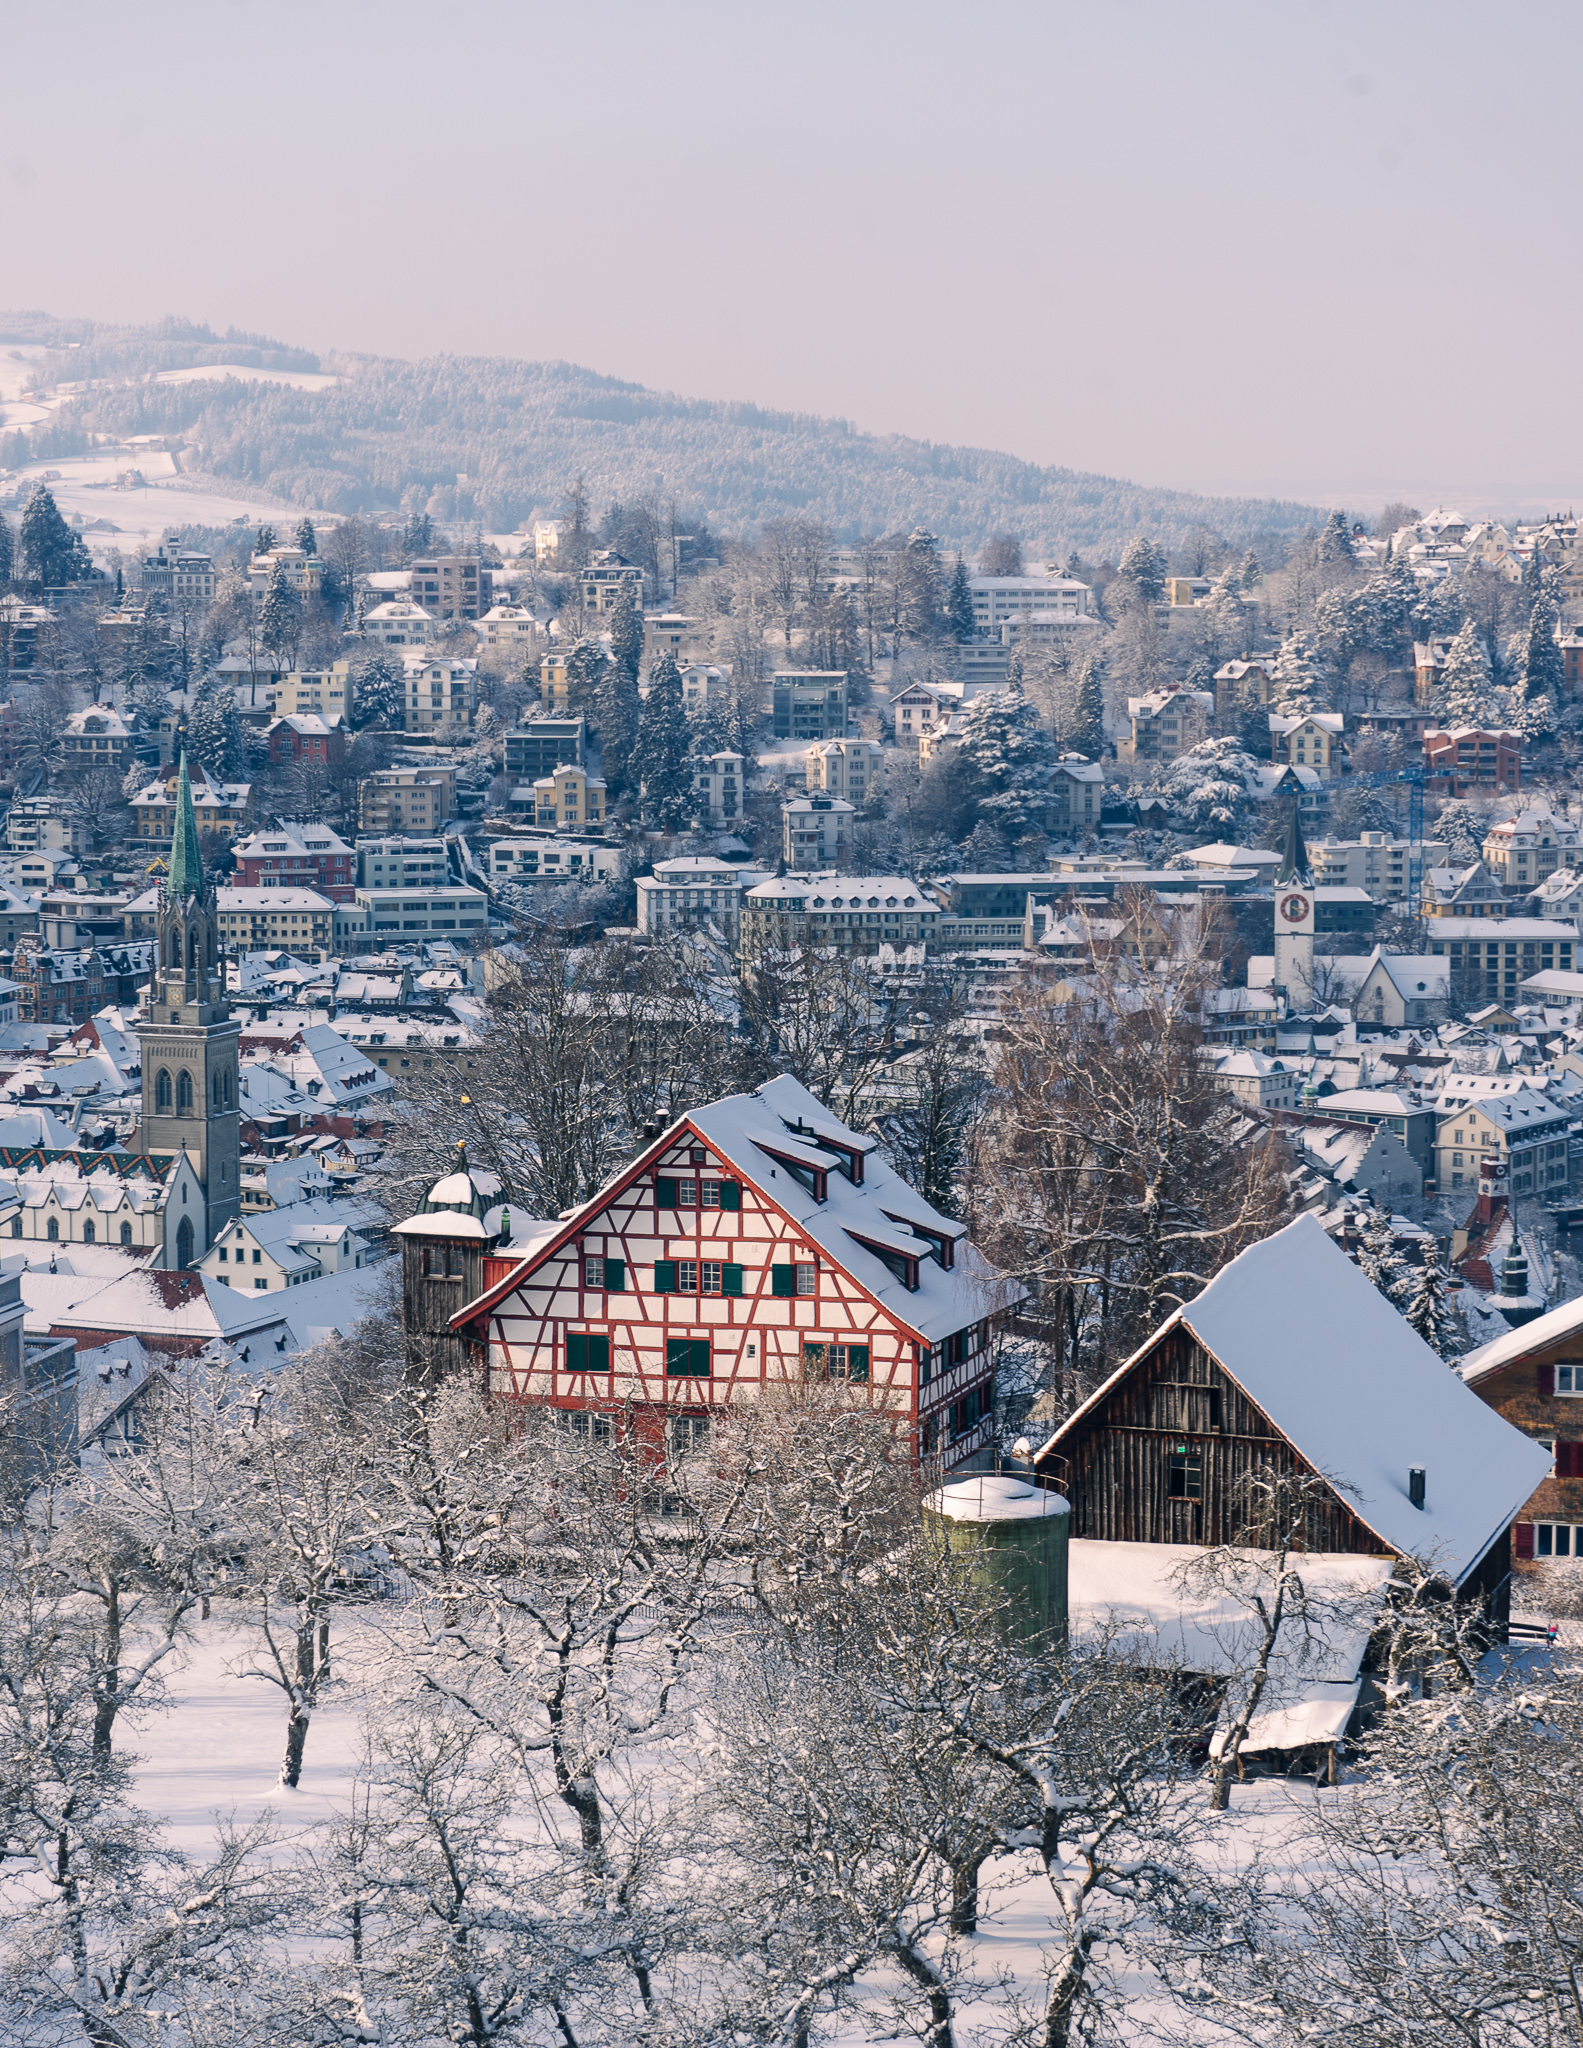 view of St. gallen in winter from above